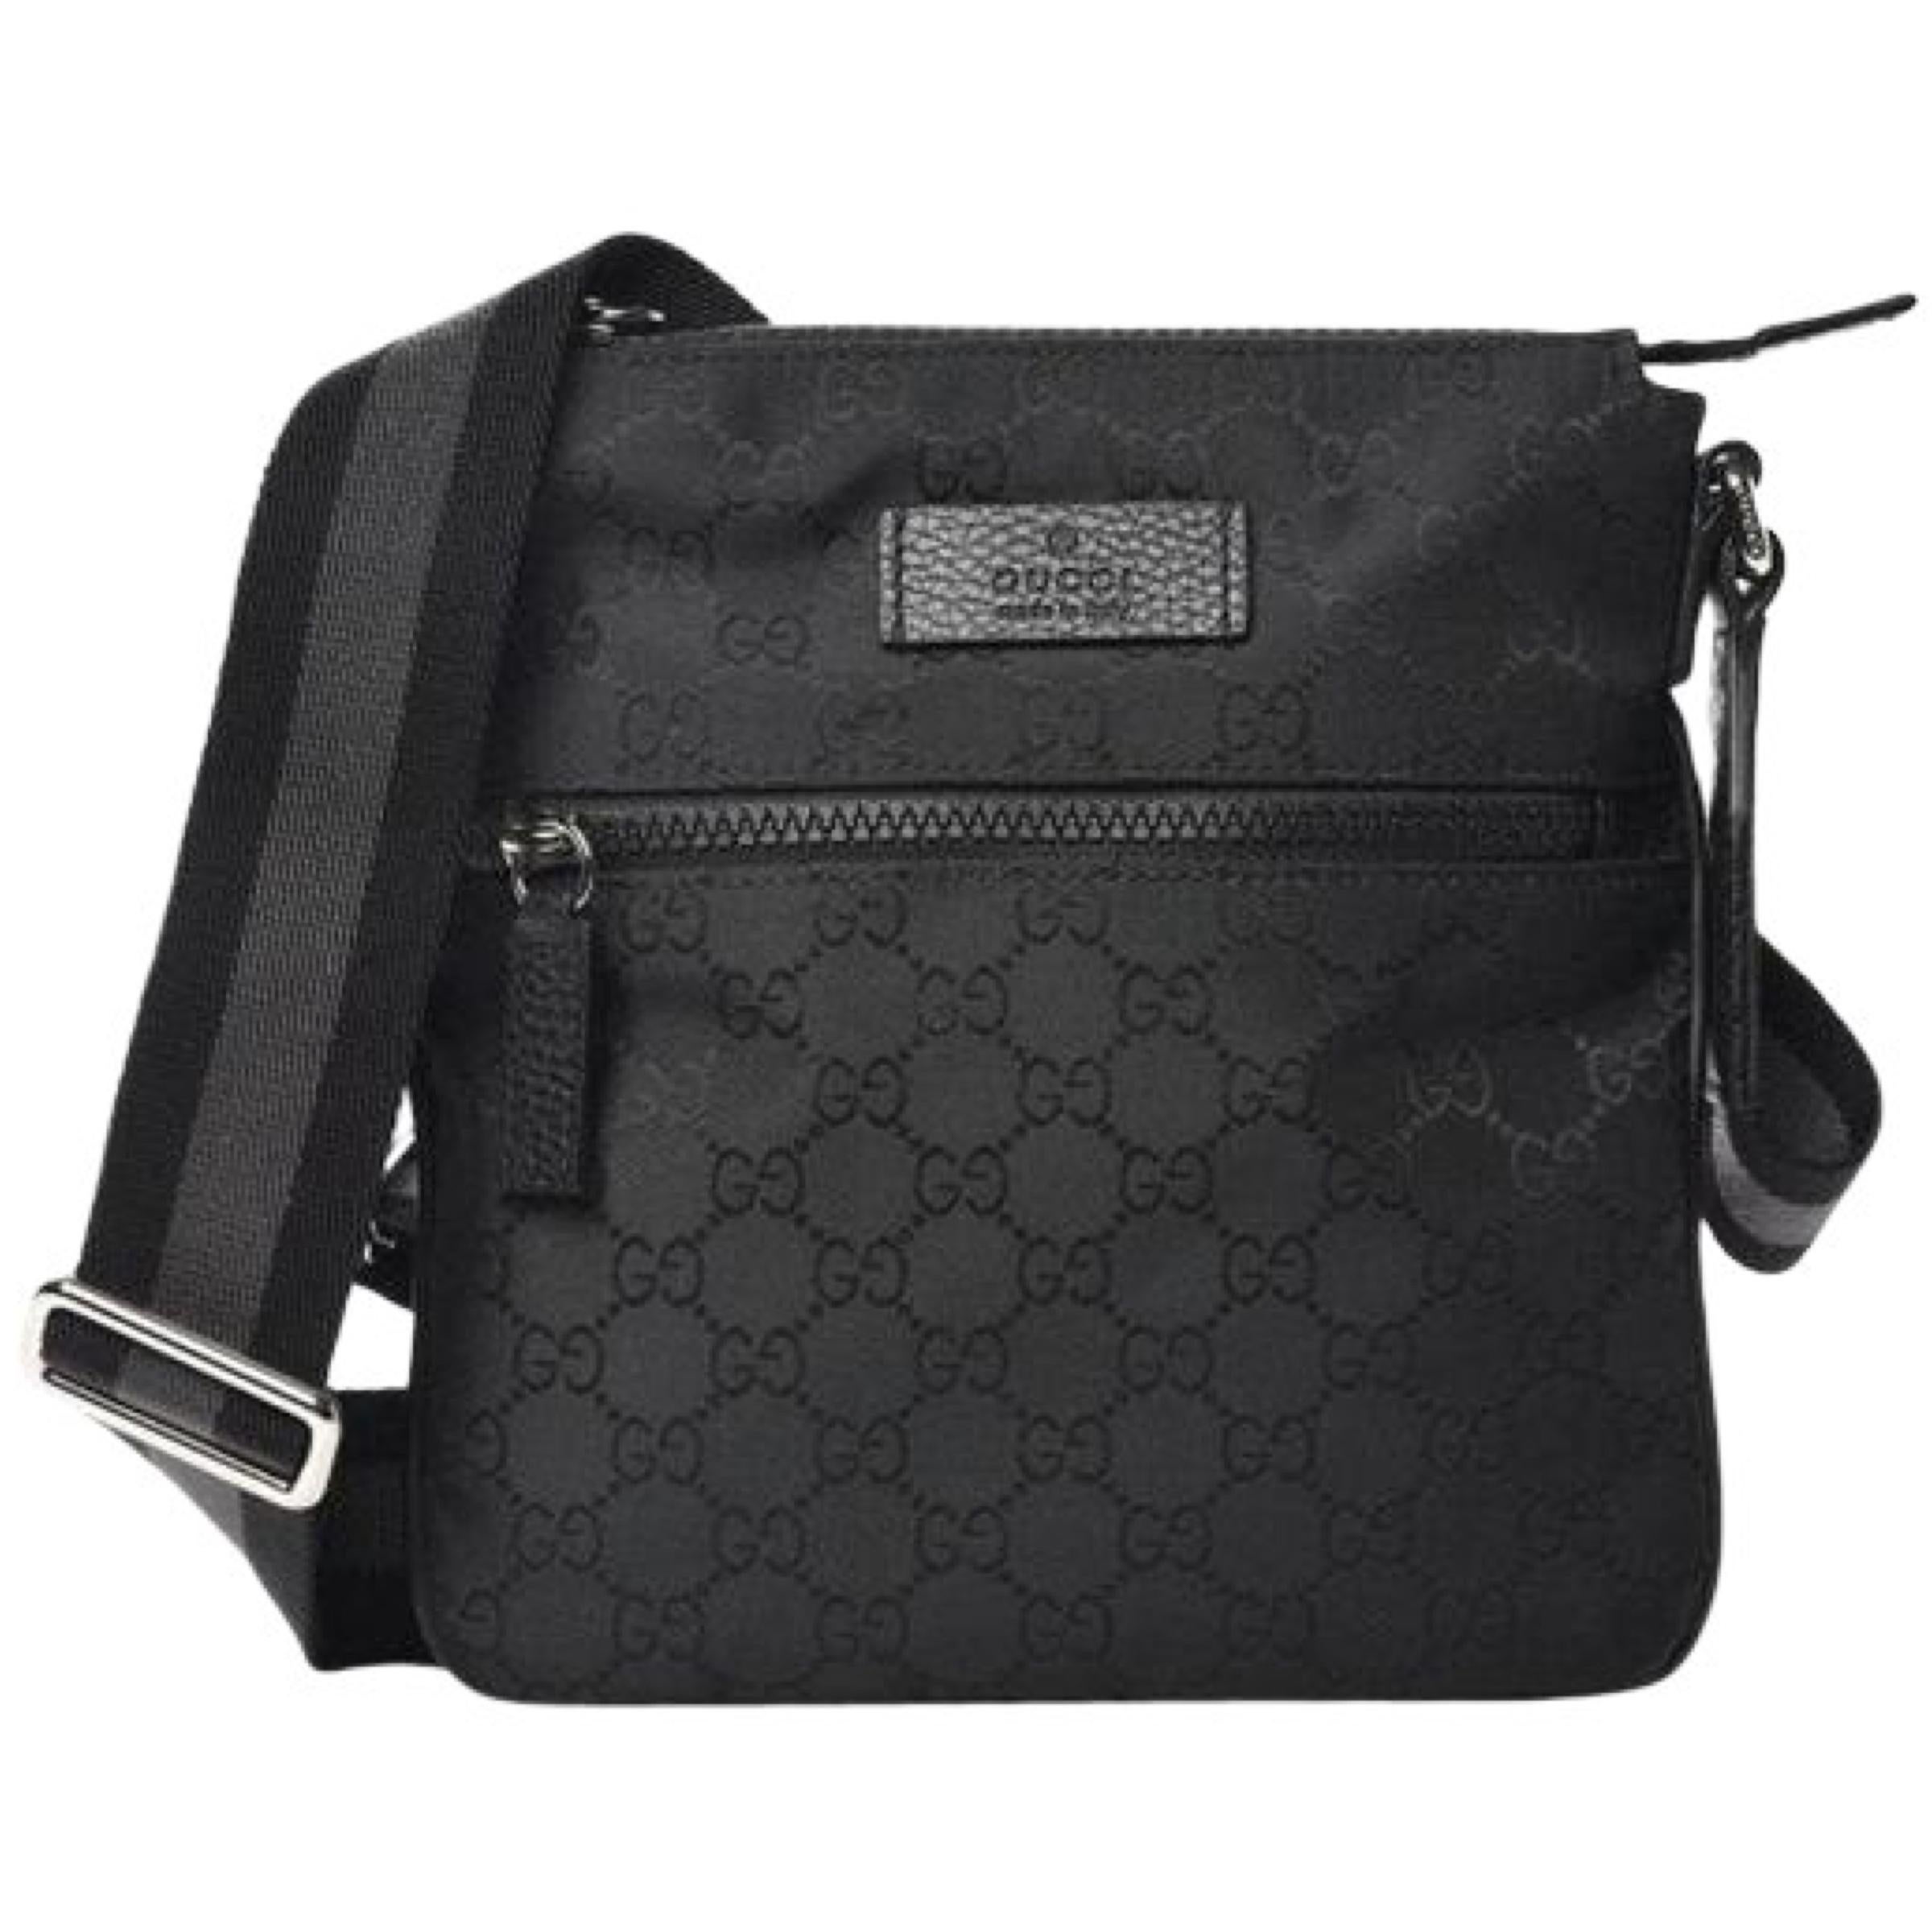 New Gucci Black Nylon GG Guccissima Web Crossbody Messenger Shoulder Bag 

Authenticity guaranteed

DETAILS
Brand: Gucci
Condition: Brand new
Gender: Unisex
Category: Crossbody bag
Color: Black
Material: Nylon
Smooth black nylon
Leather trim
GG